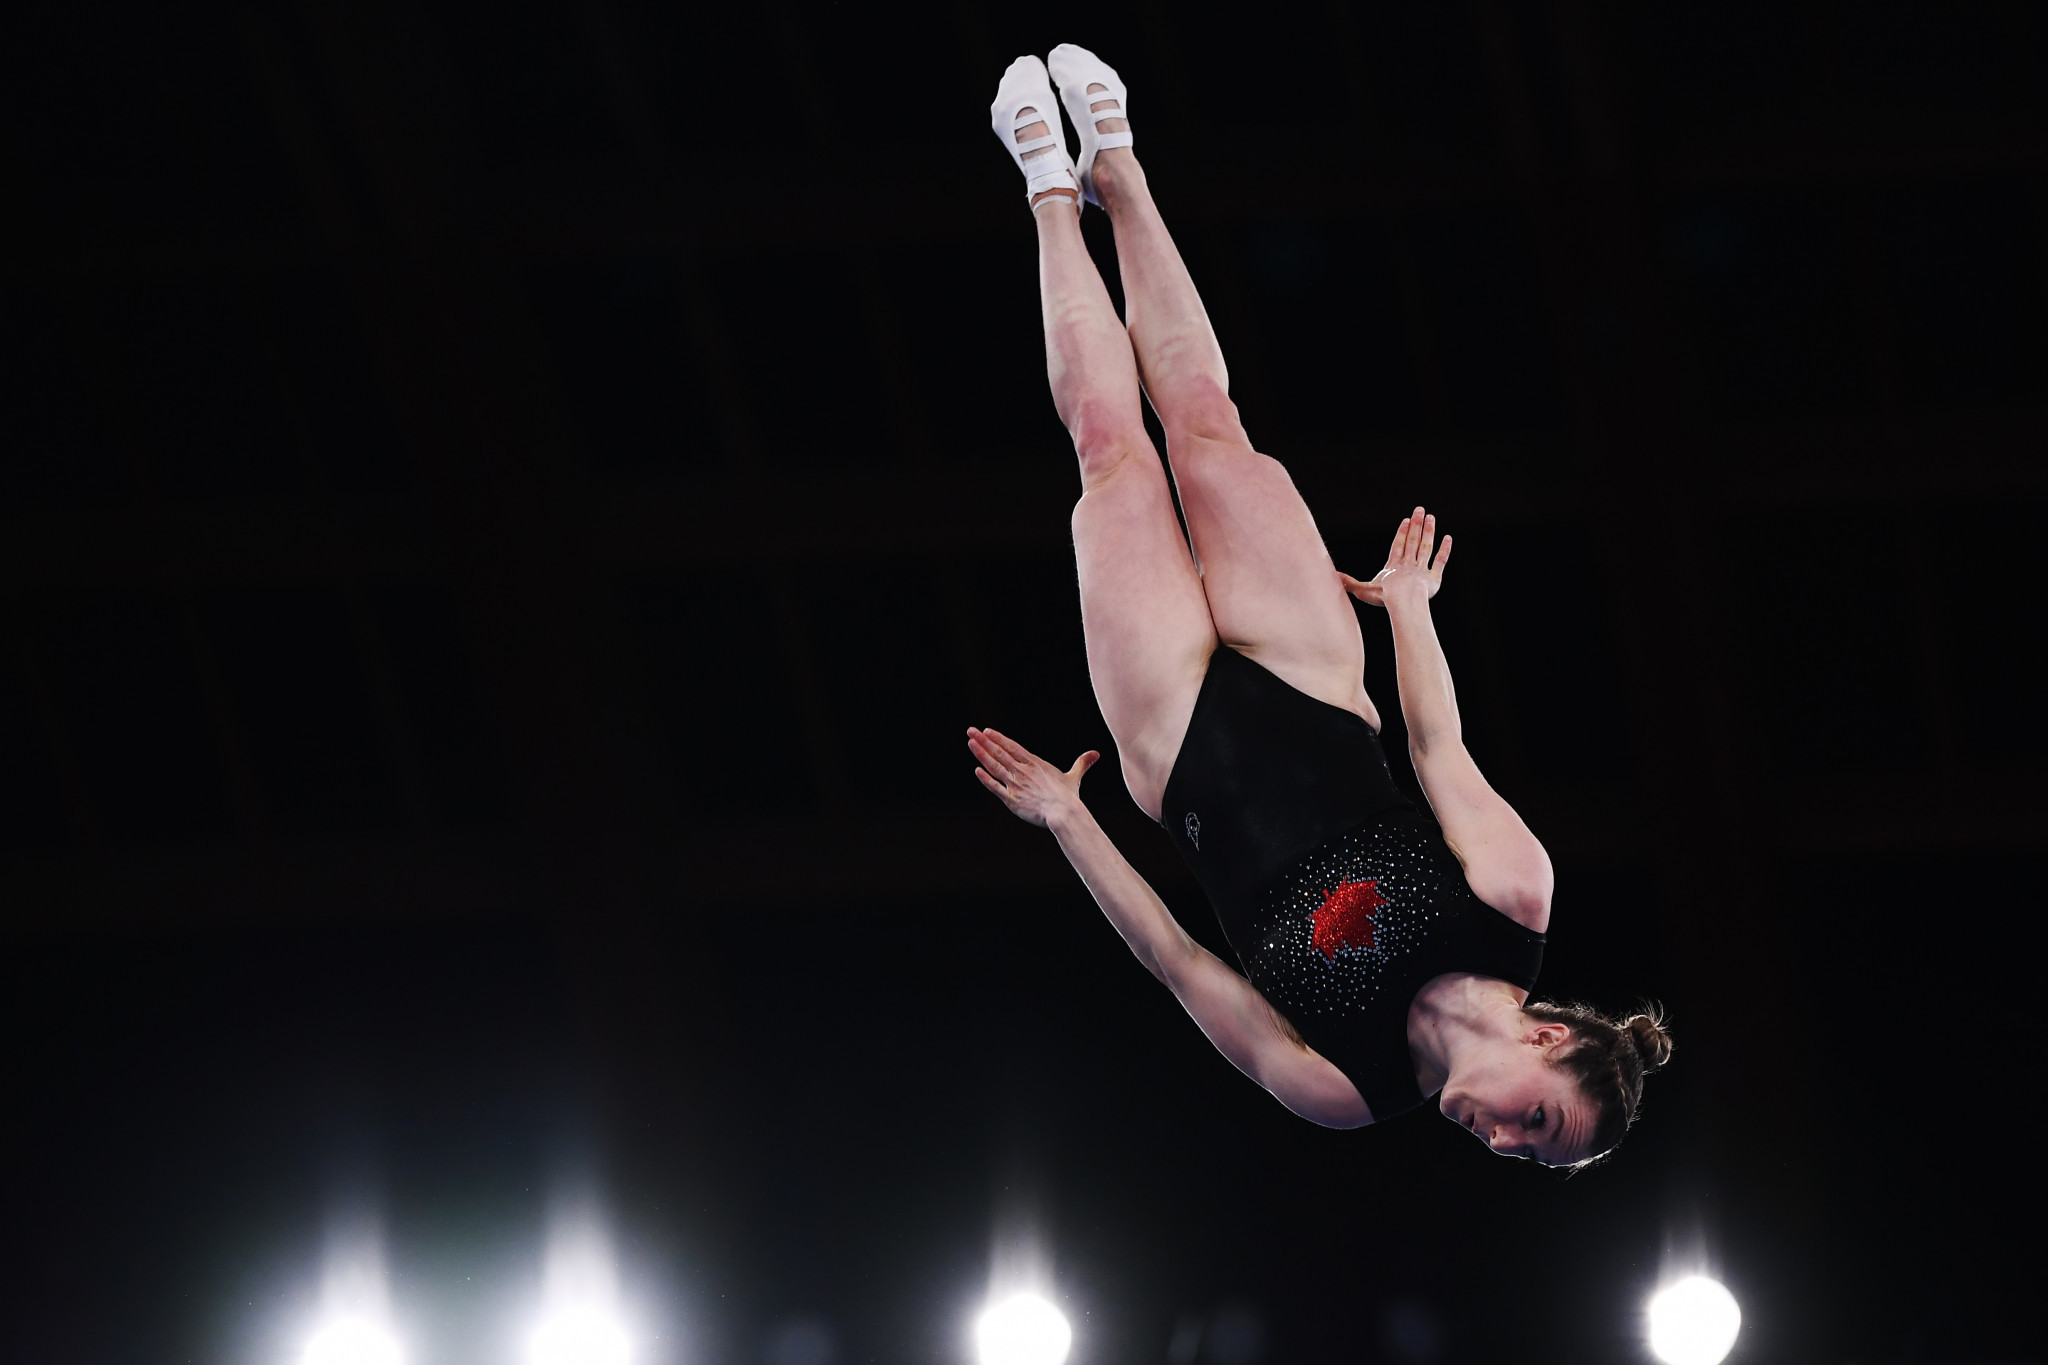 Canada's Olympic champion Rosannagh MacLennan will be the gymnast to beat in the women's event ©Getty Images